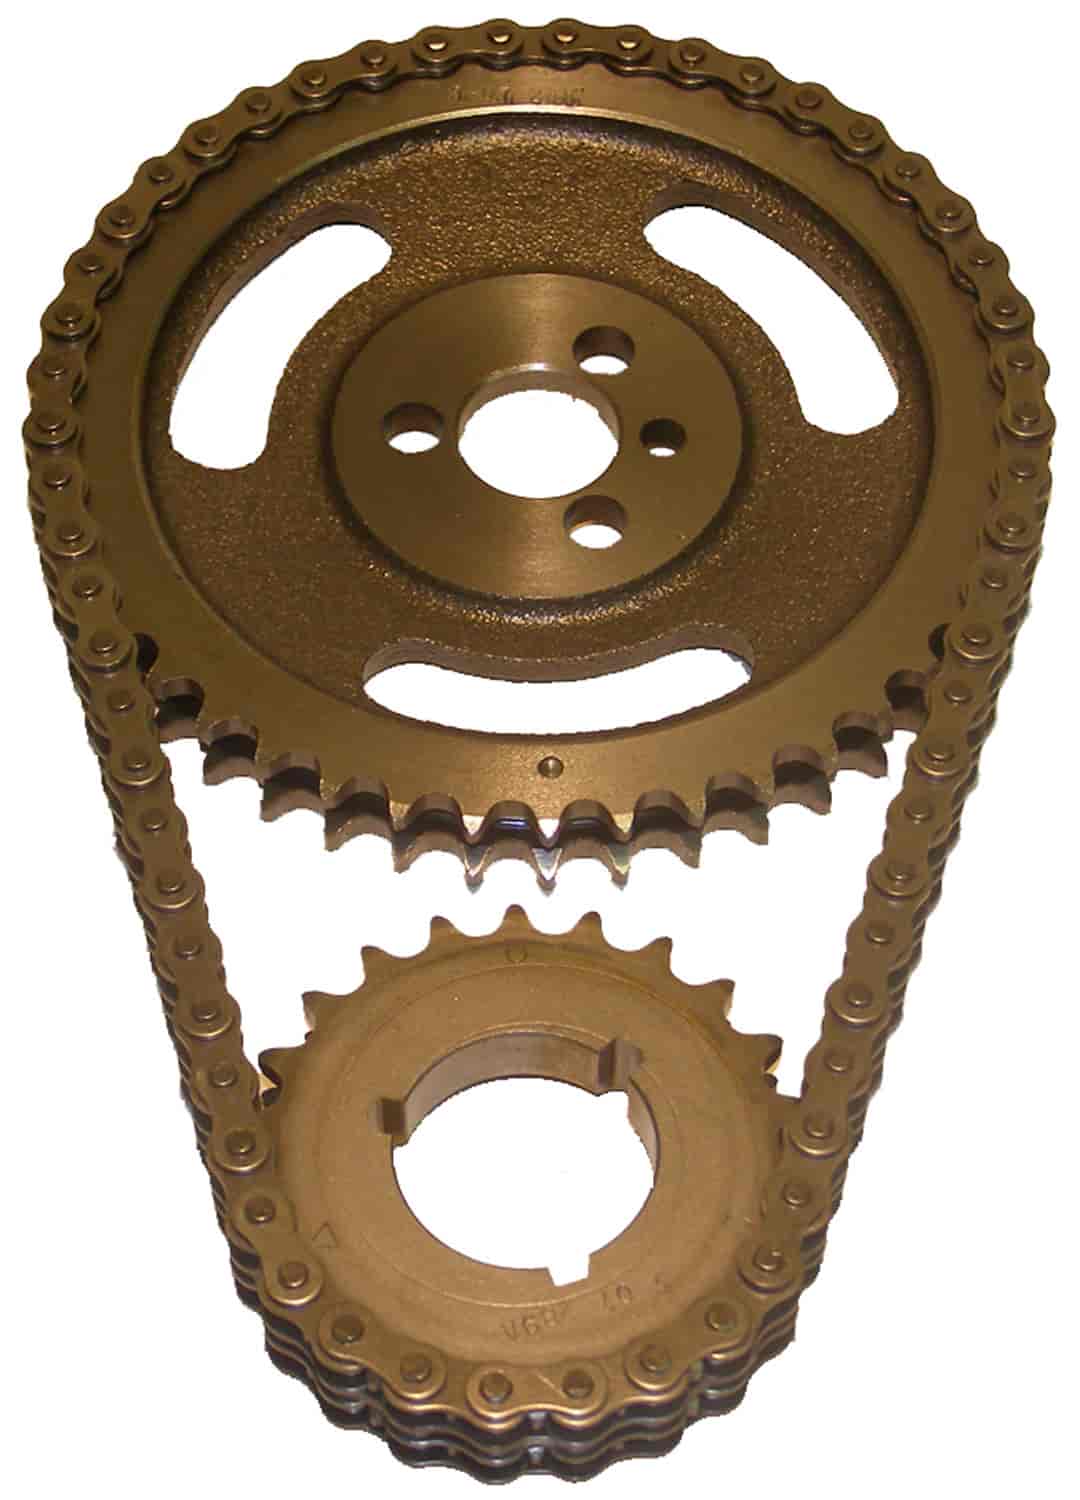 HD Timing Chain Set 1955-96 V-6 and Small Block V-8 Chevy